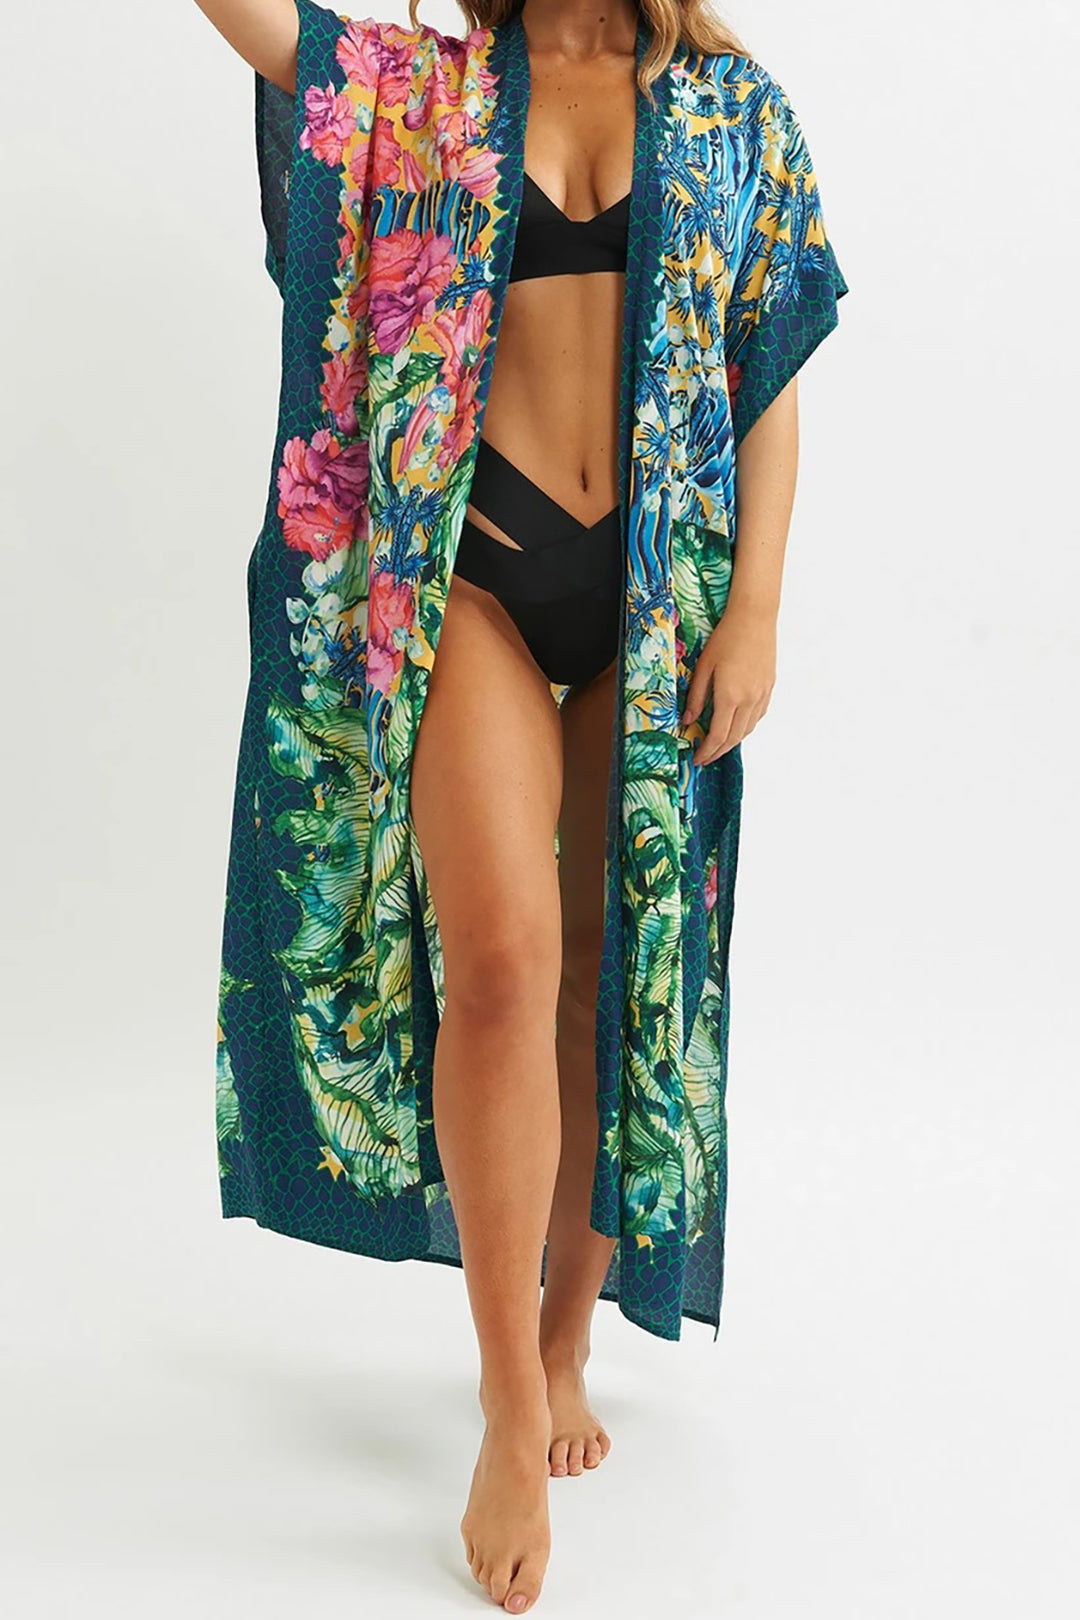 Floral Print Rope Detail Beach Cover-Up